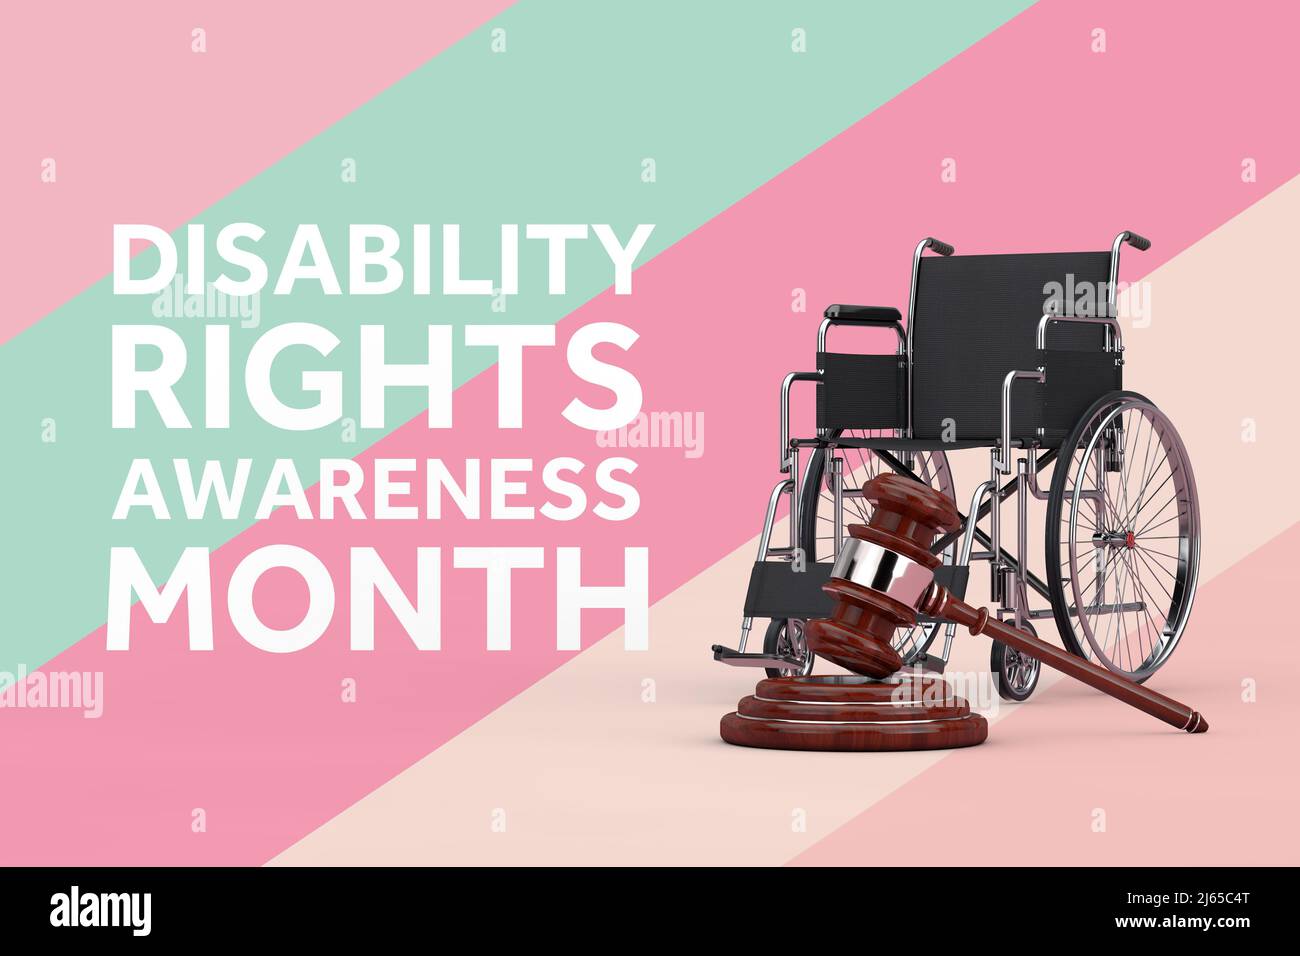 Disability Rights Awareness Month Concept. Wooden Justice Gavel, Wheelchair and Disability Rights Awareness Month Sign on a multicolored background. 3 Stock Photo